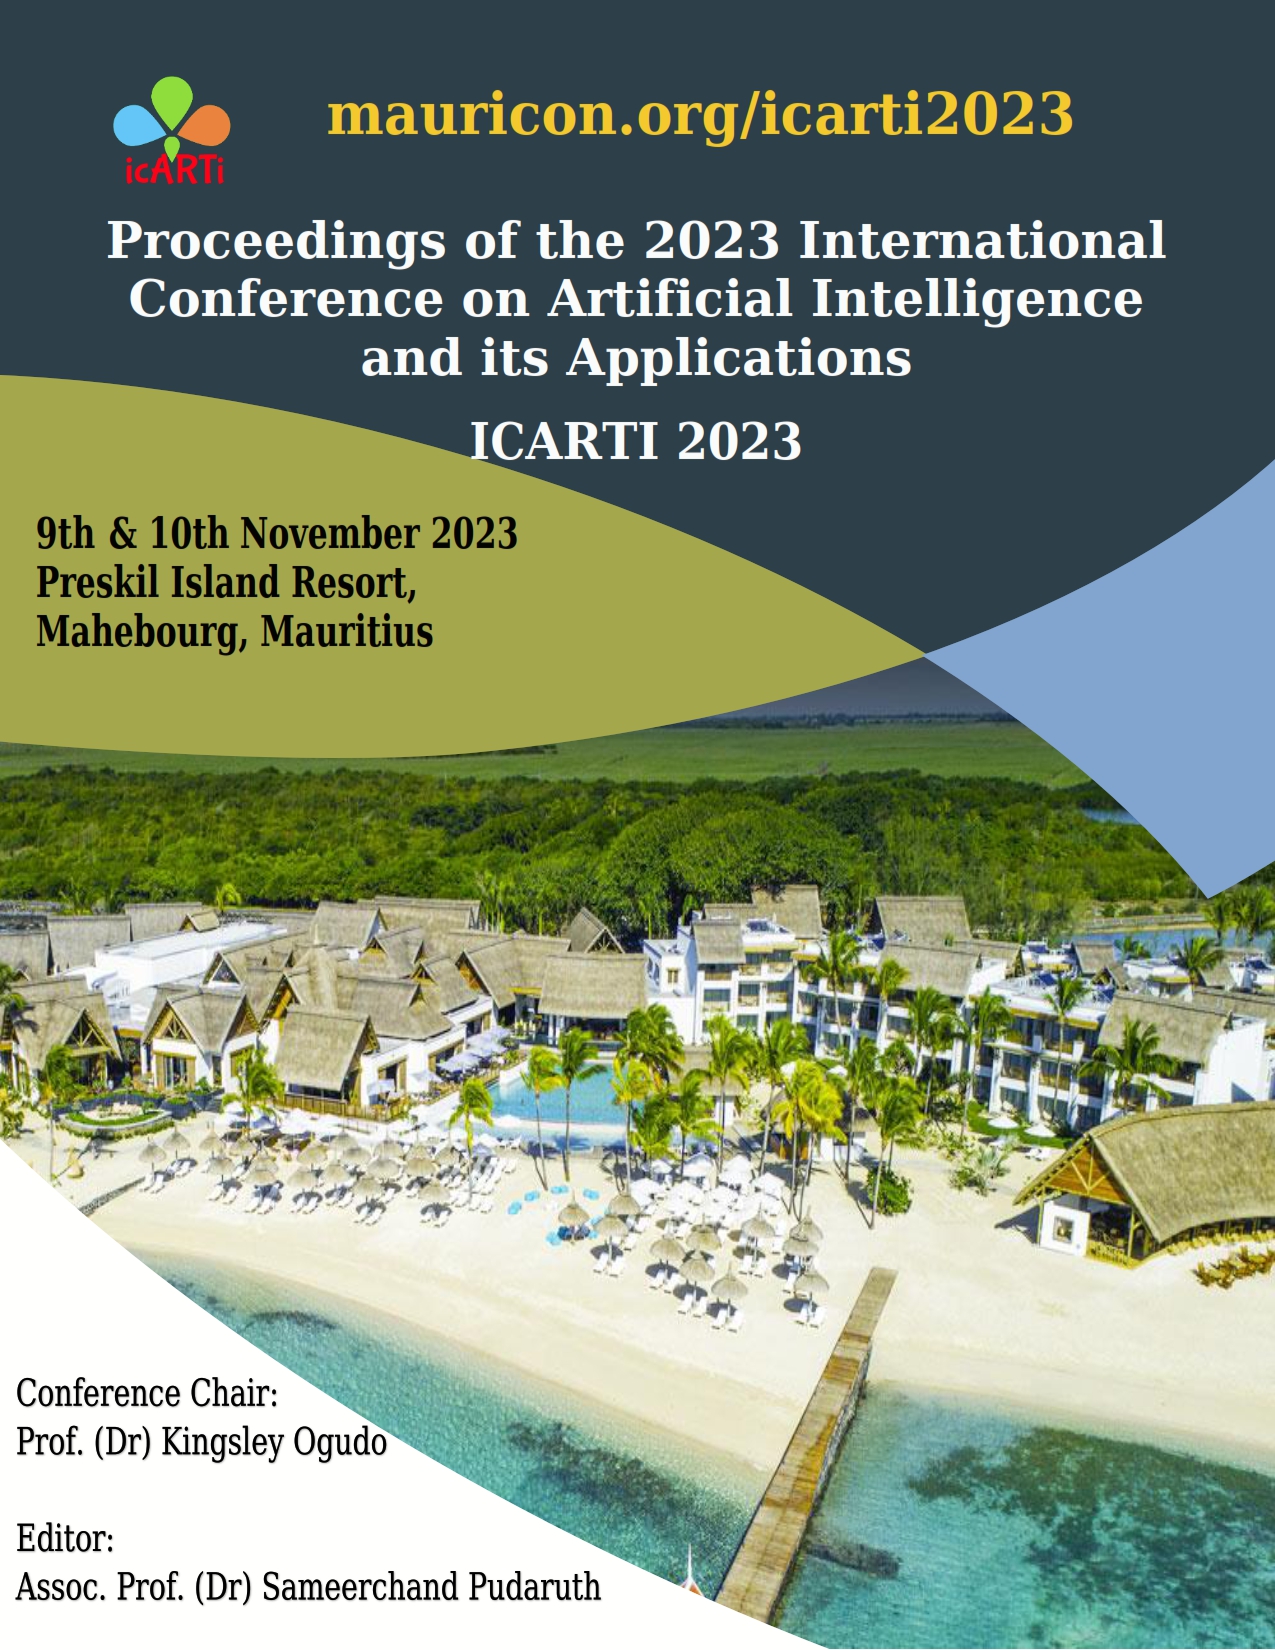 					View 2023: International Conference on Artificial Intelligence and its Applications Proceedings
				